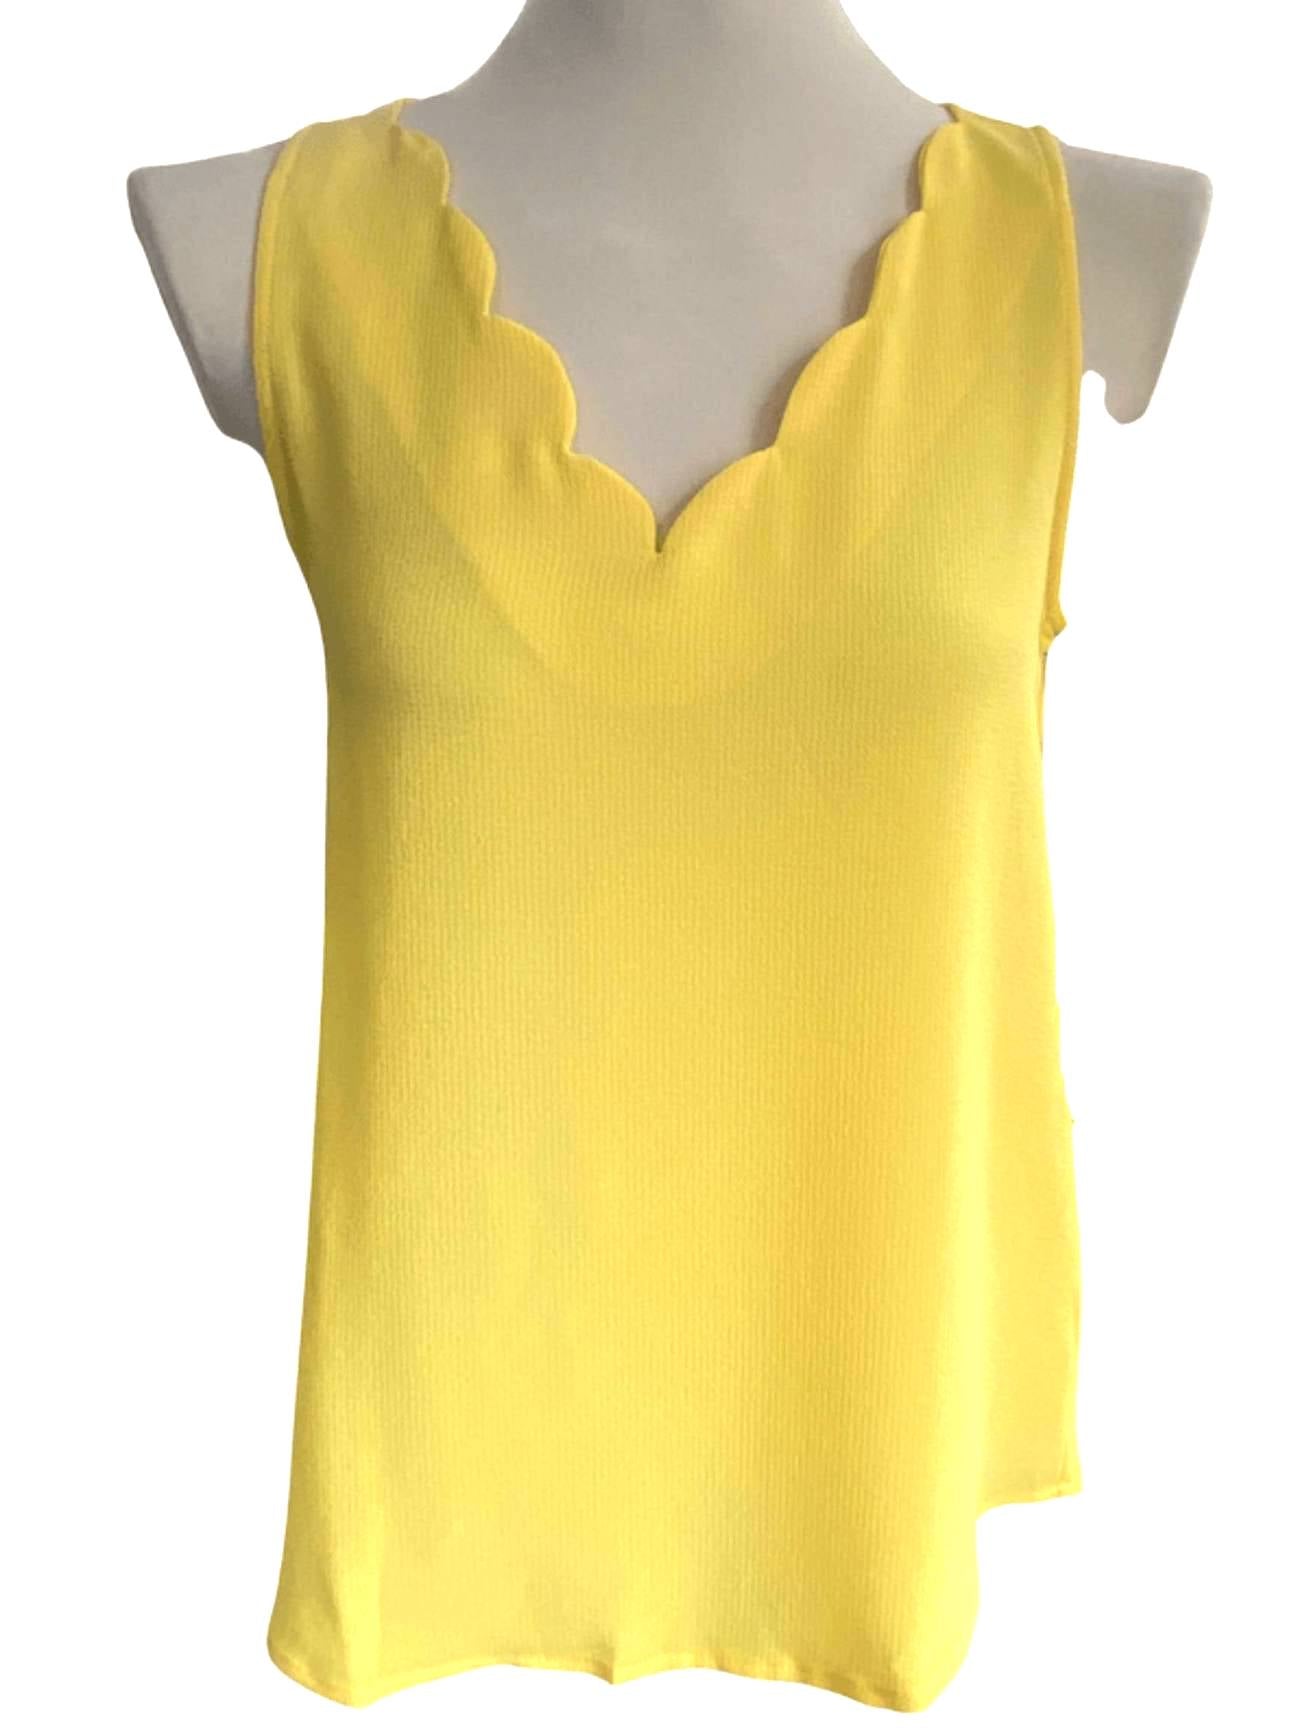 Cool Winter GIBSON yellow scalloped v-neck top